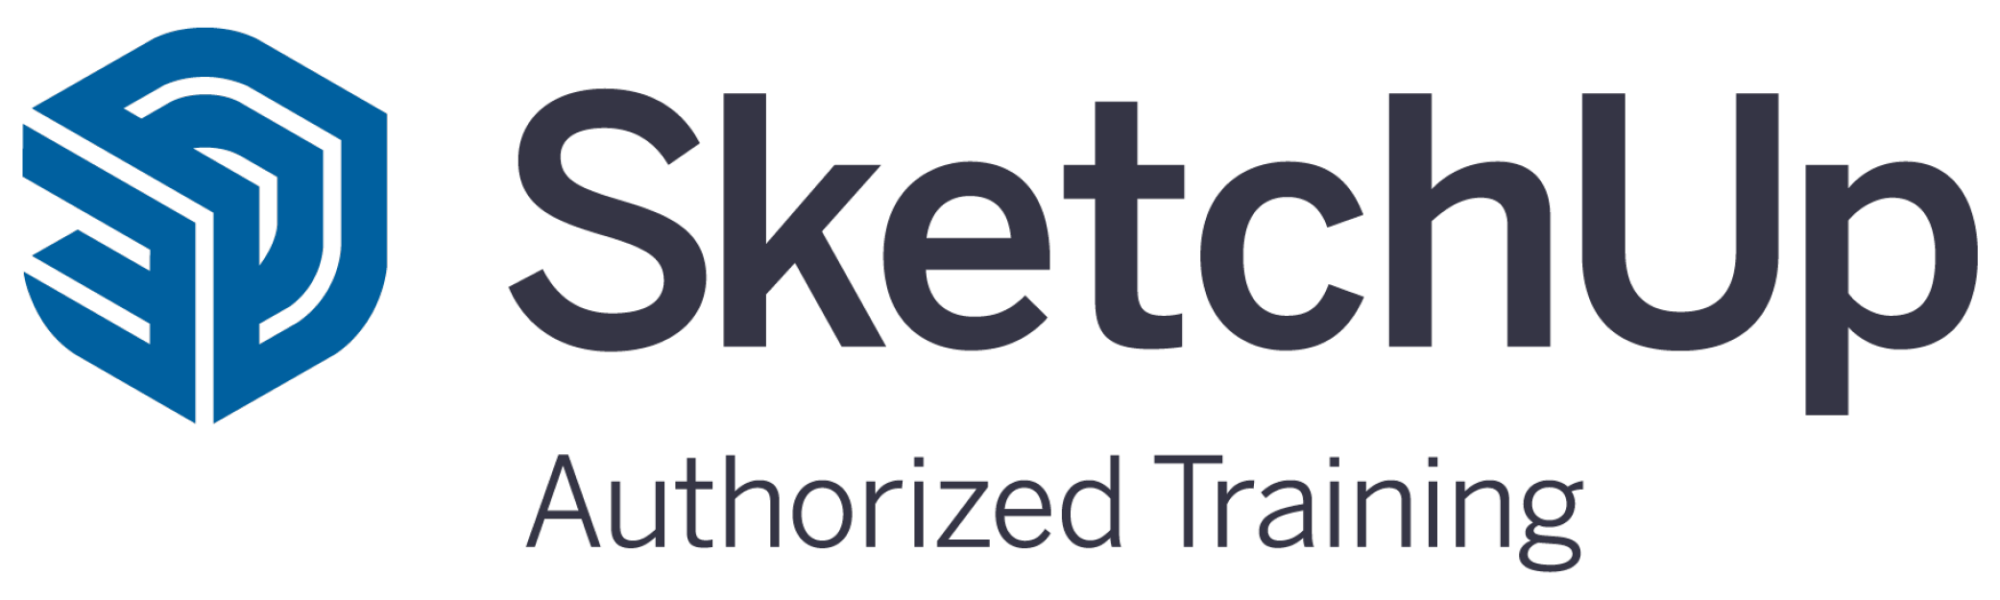 authorized SketchUp trainer